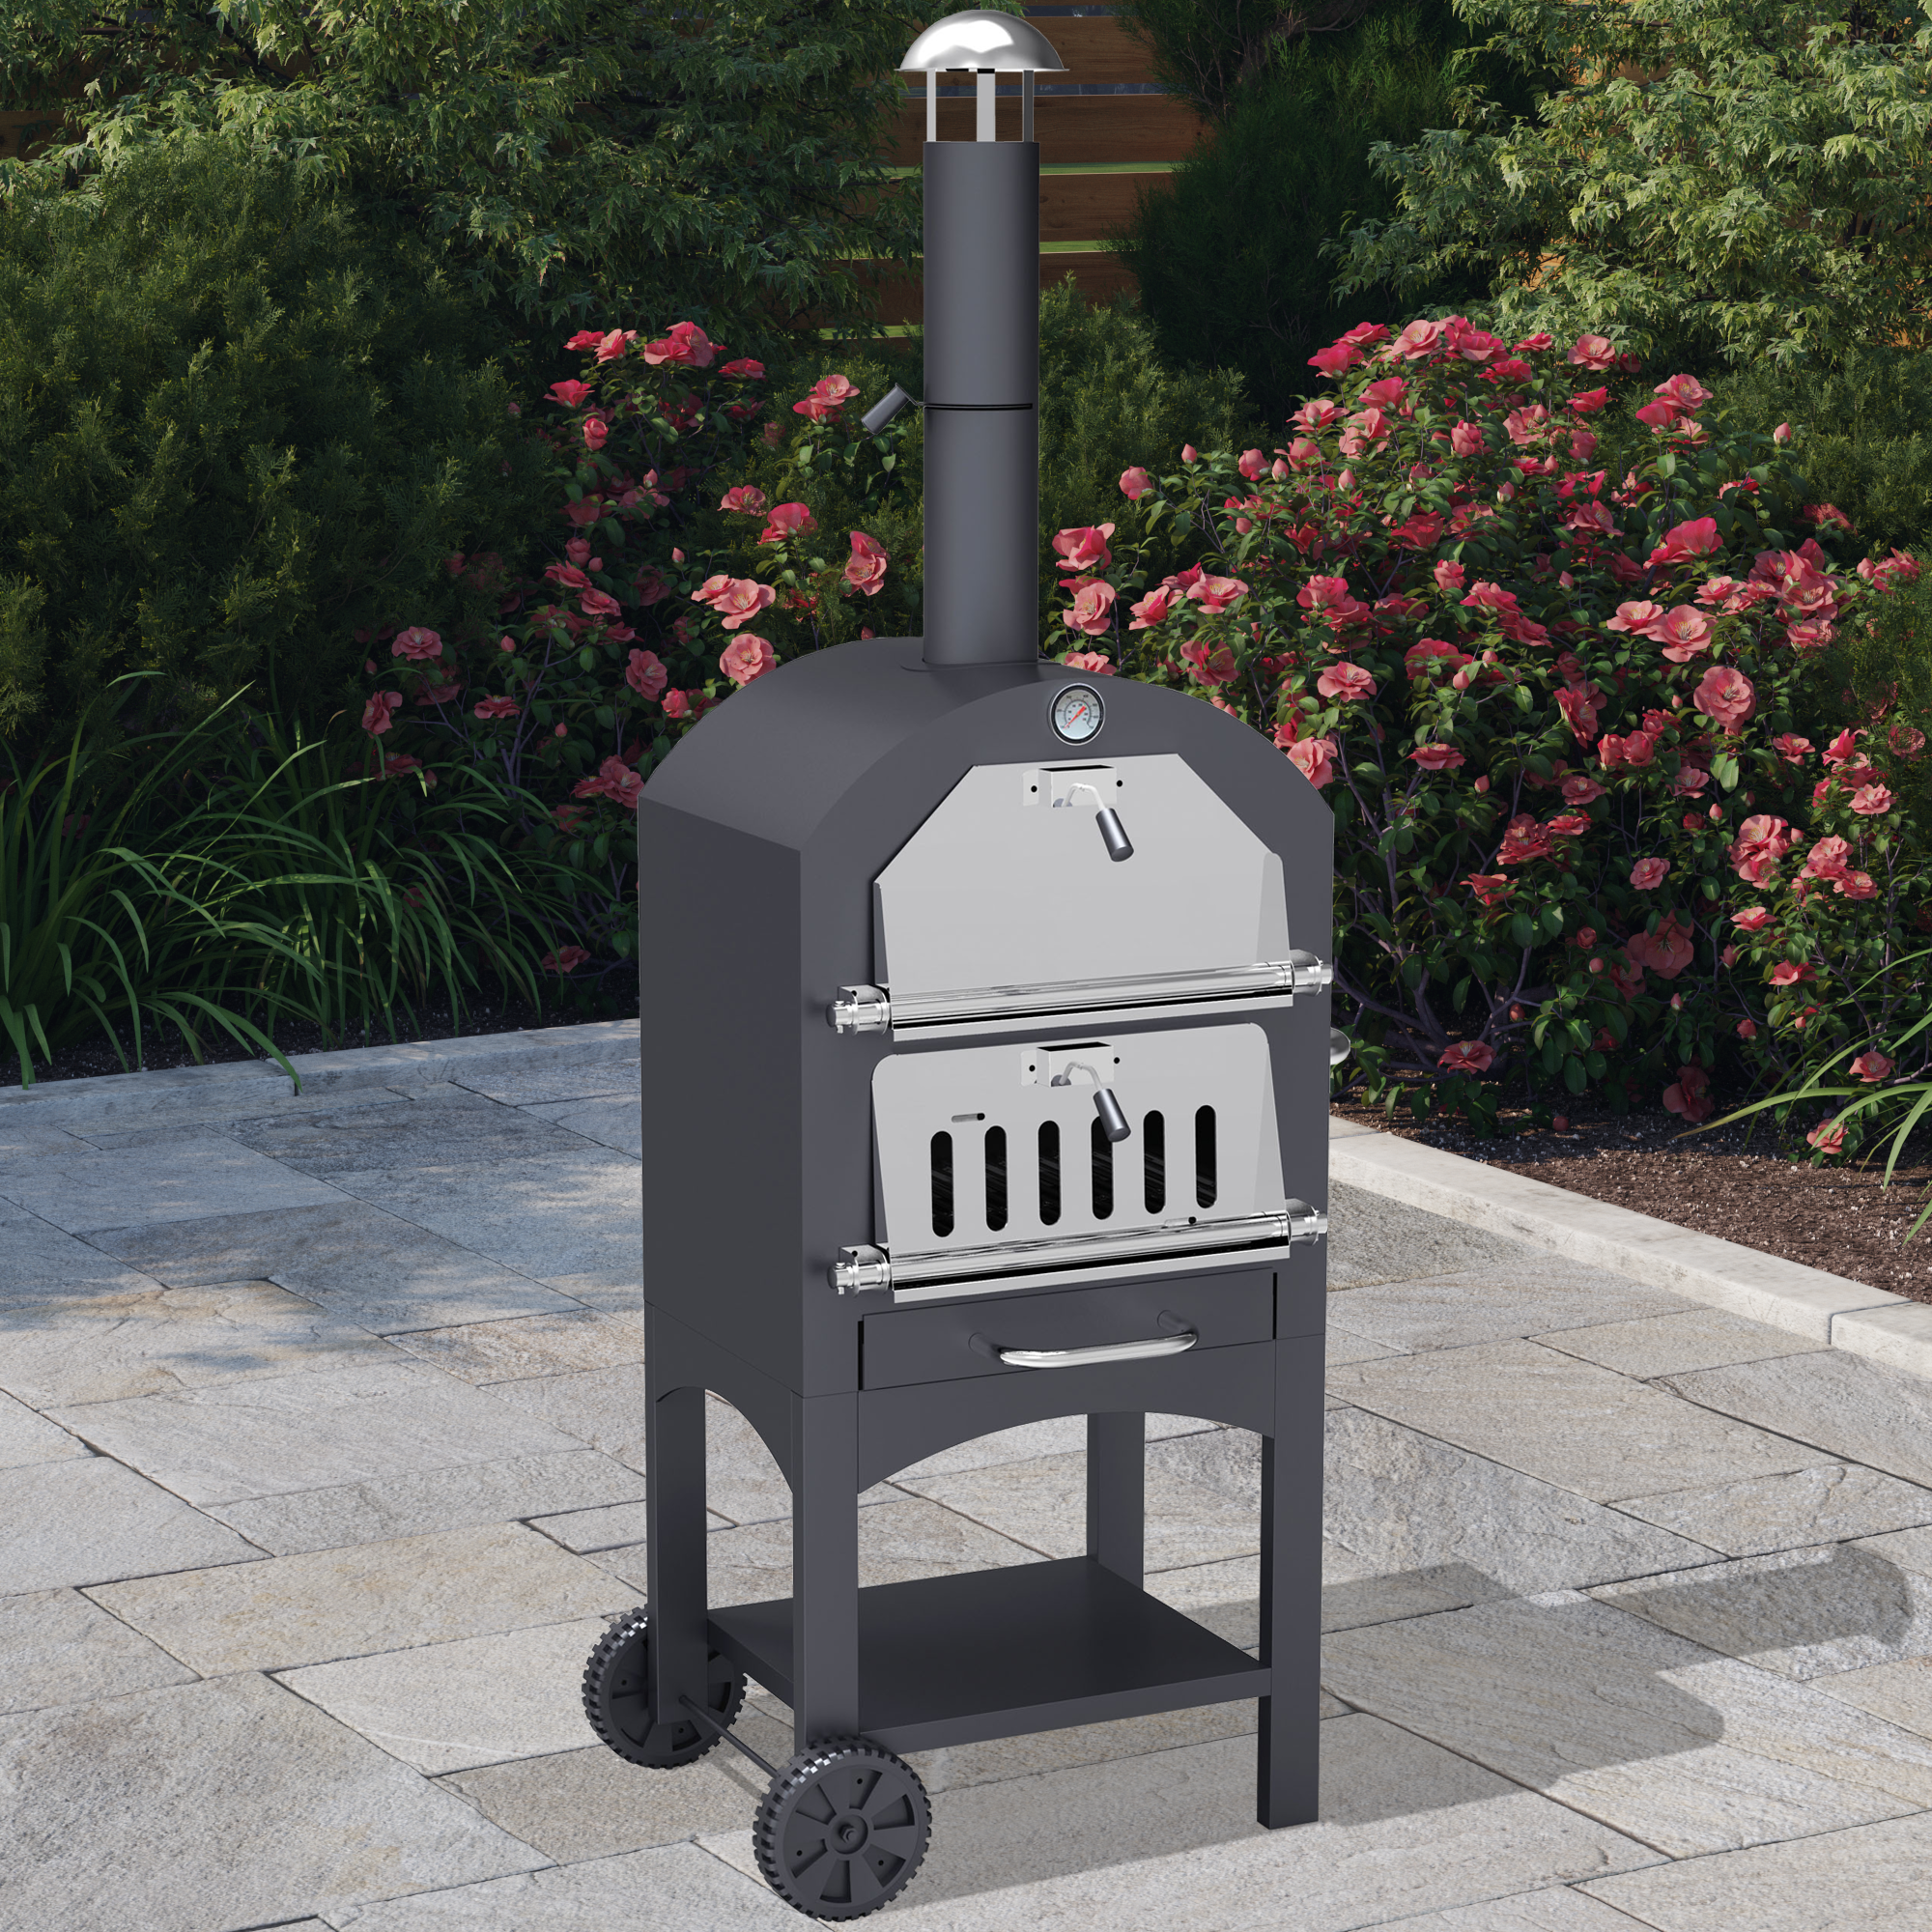 Billyoh Outdoor Pizza Oven Chimney Smoker Charcoal Barbecue 3 In 1 Pizza Oven Bbq And Smoker